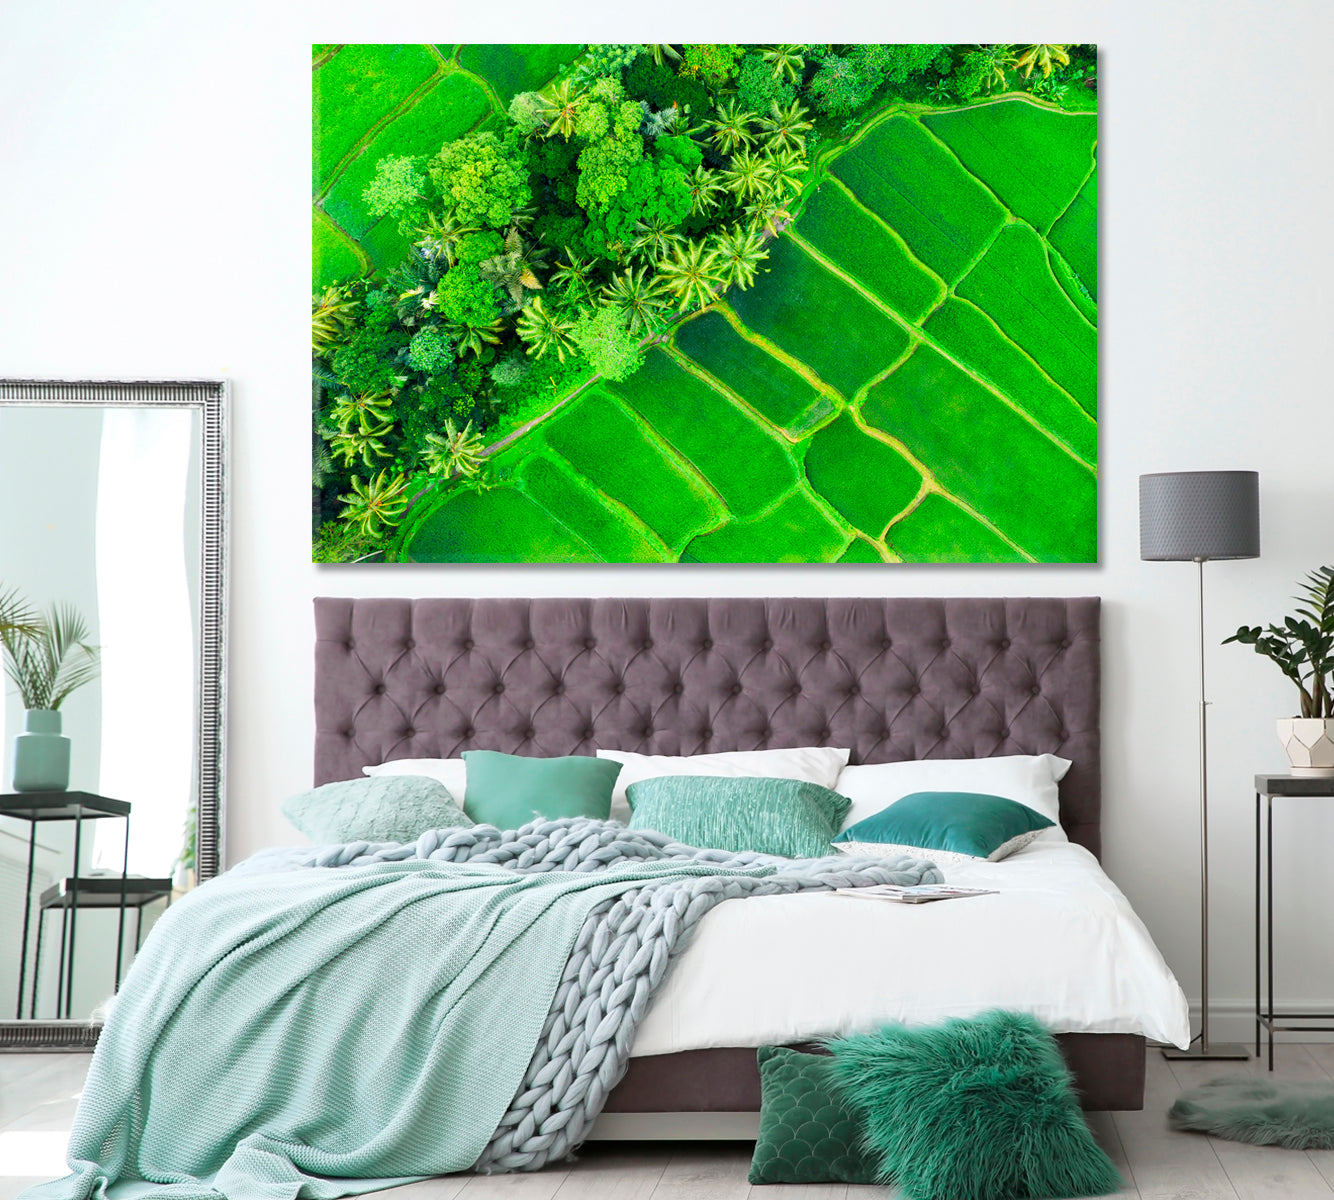 Rice Terraces in Summer Bali Indonesia Canvas Print ArtLexy 1 Panel 24"x16" inches 